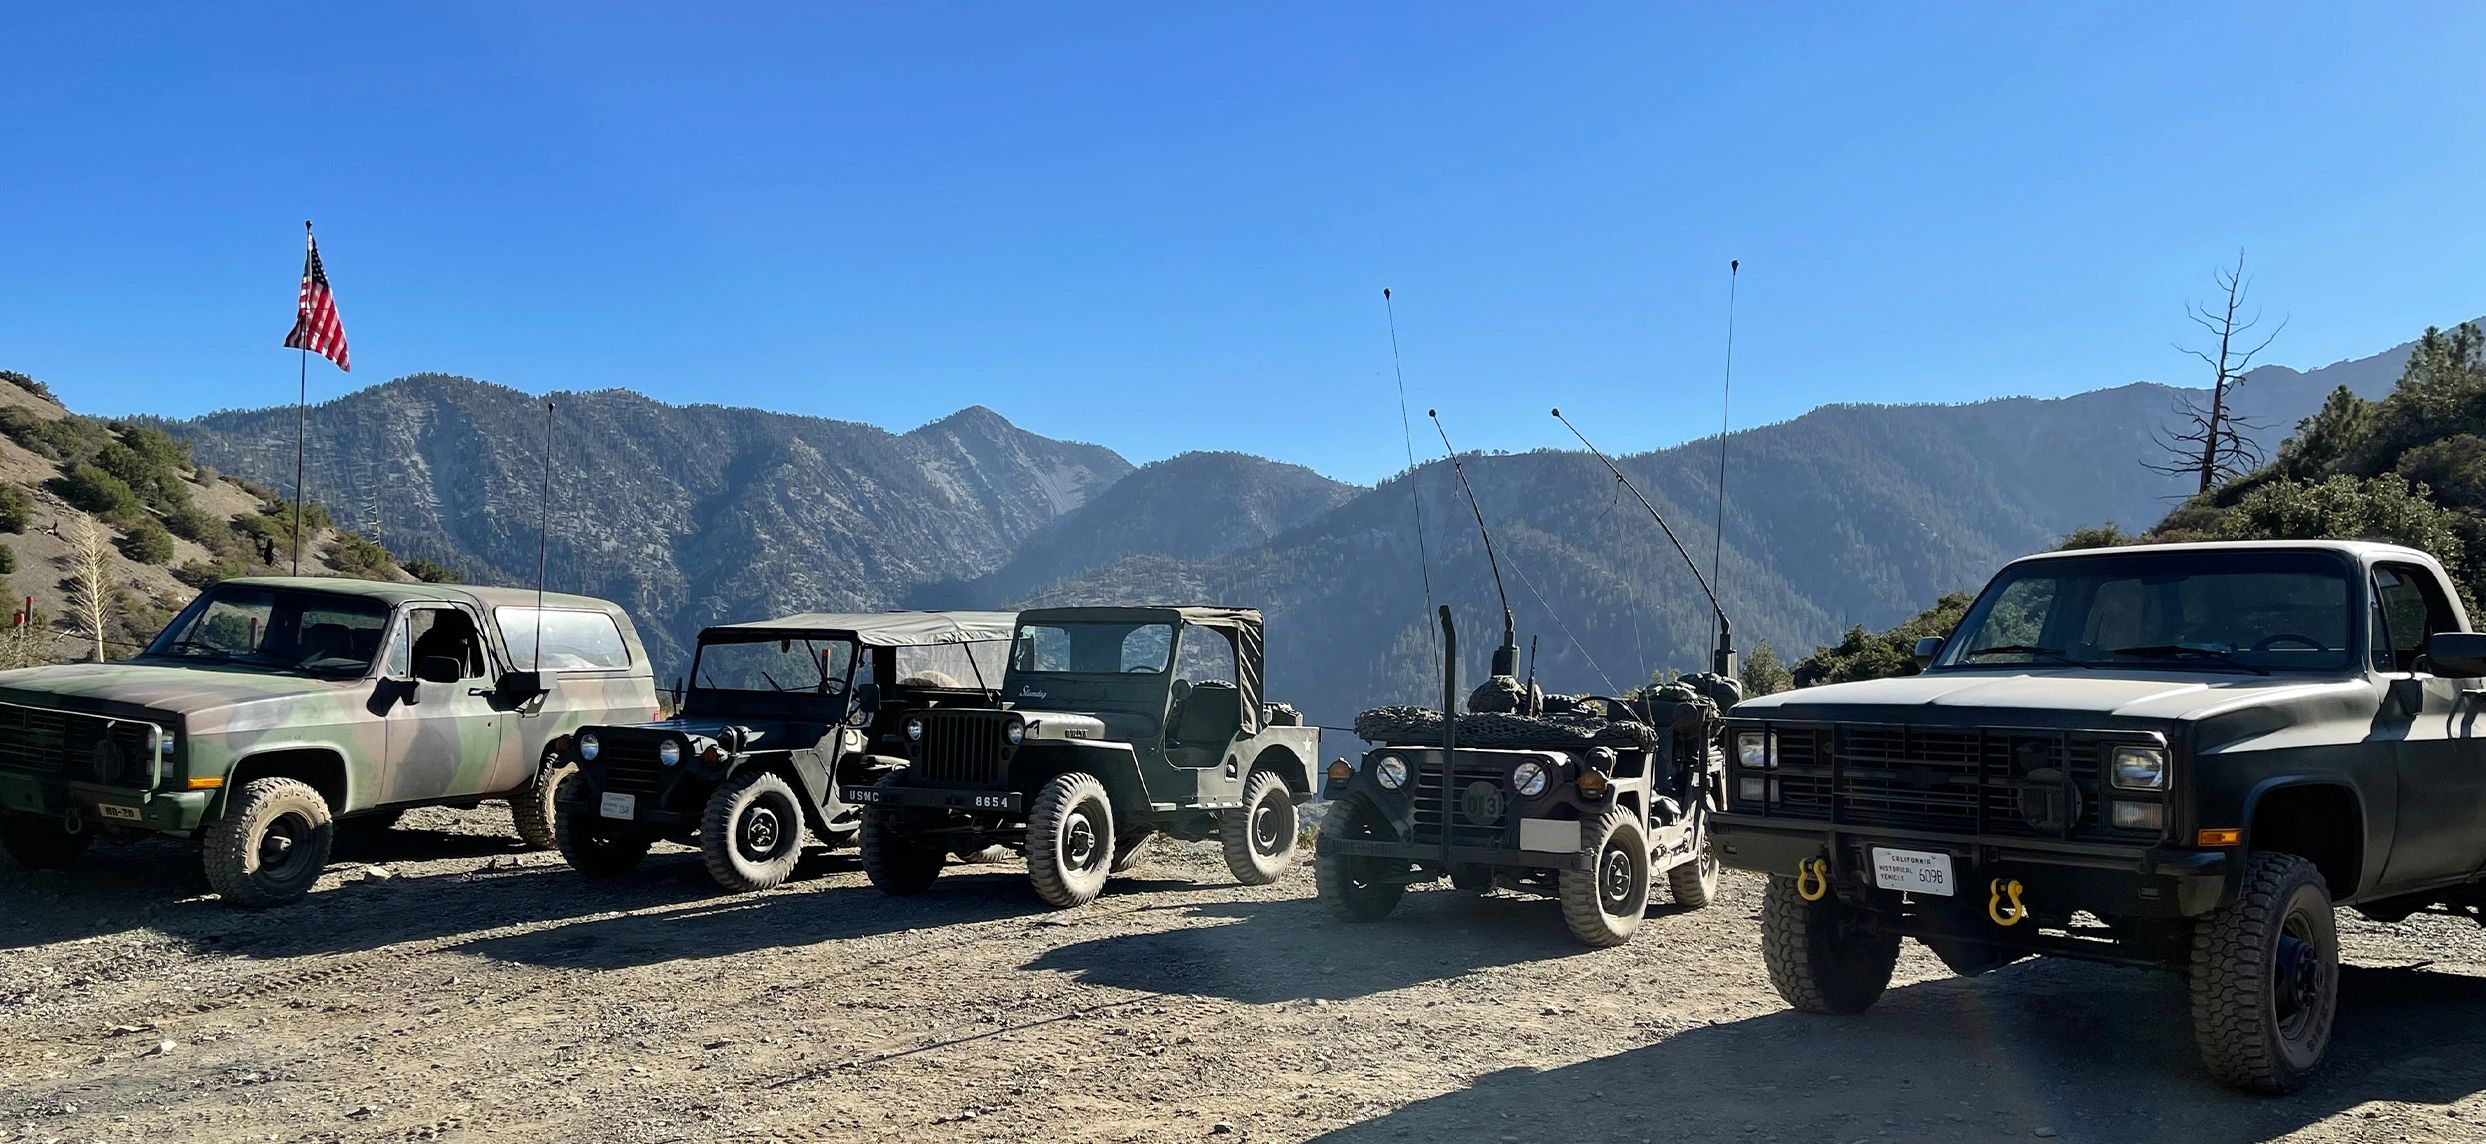 Southern California Military Vehicle Collector Club displaying their vehicles.